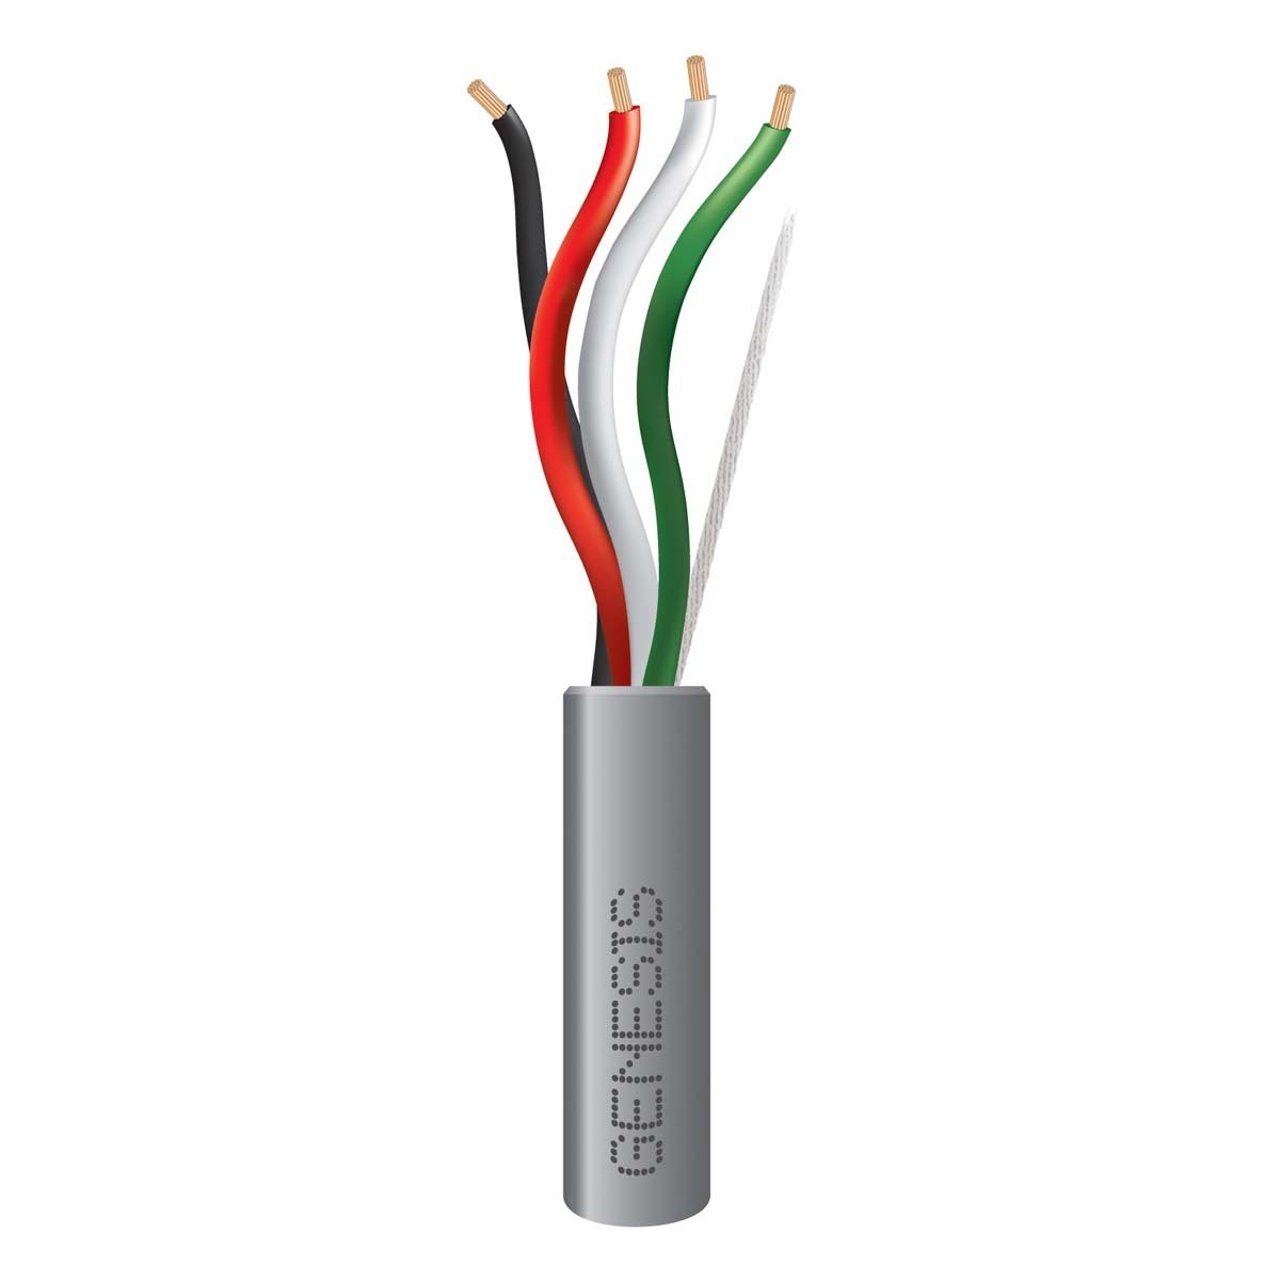 GENESIS CABLE | Cable 18/4 STR
Riser 500&#39; Gray PB